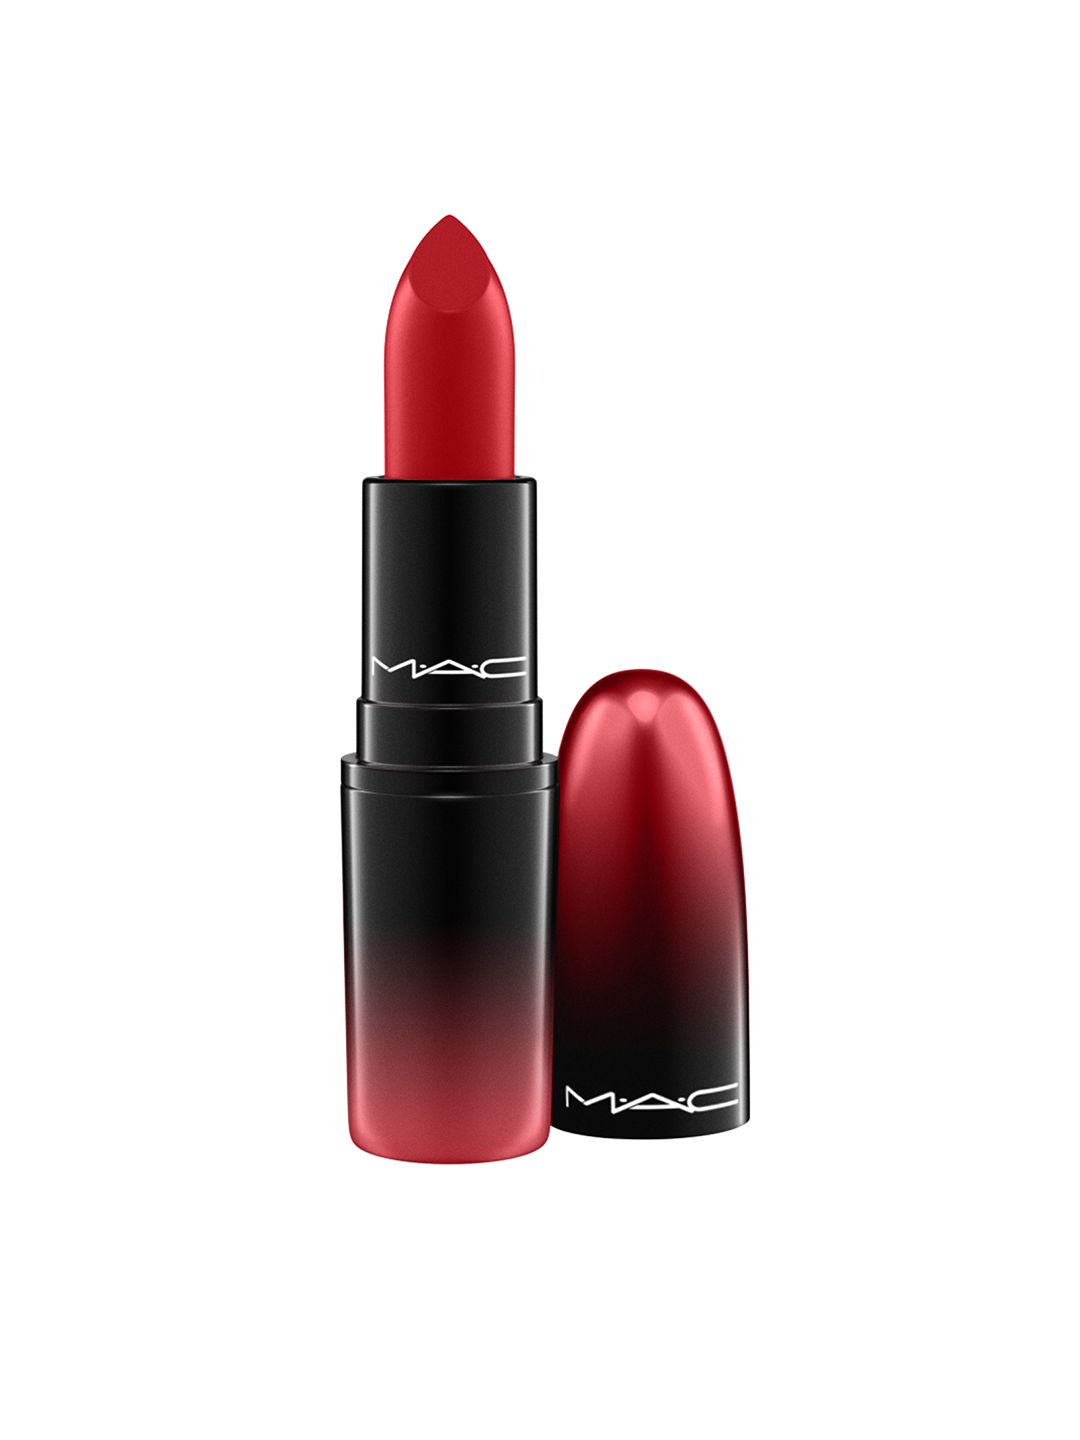 M.A.C Love Me Lipstick - 423 E For Effortless 3 g Price in India